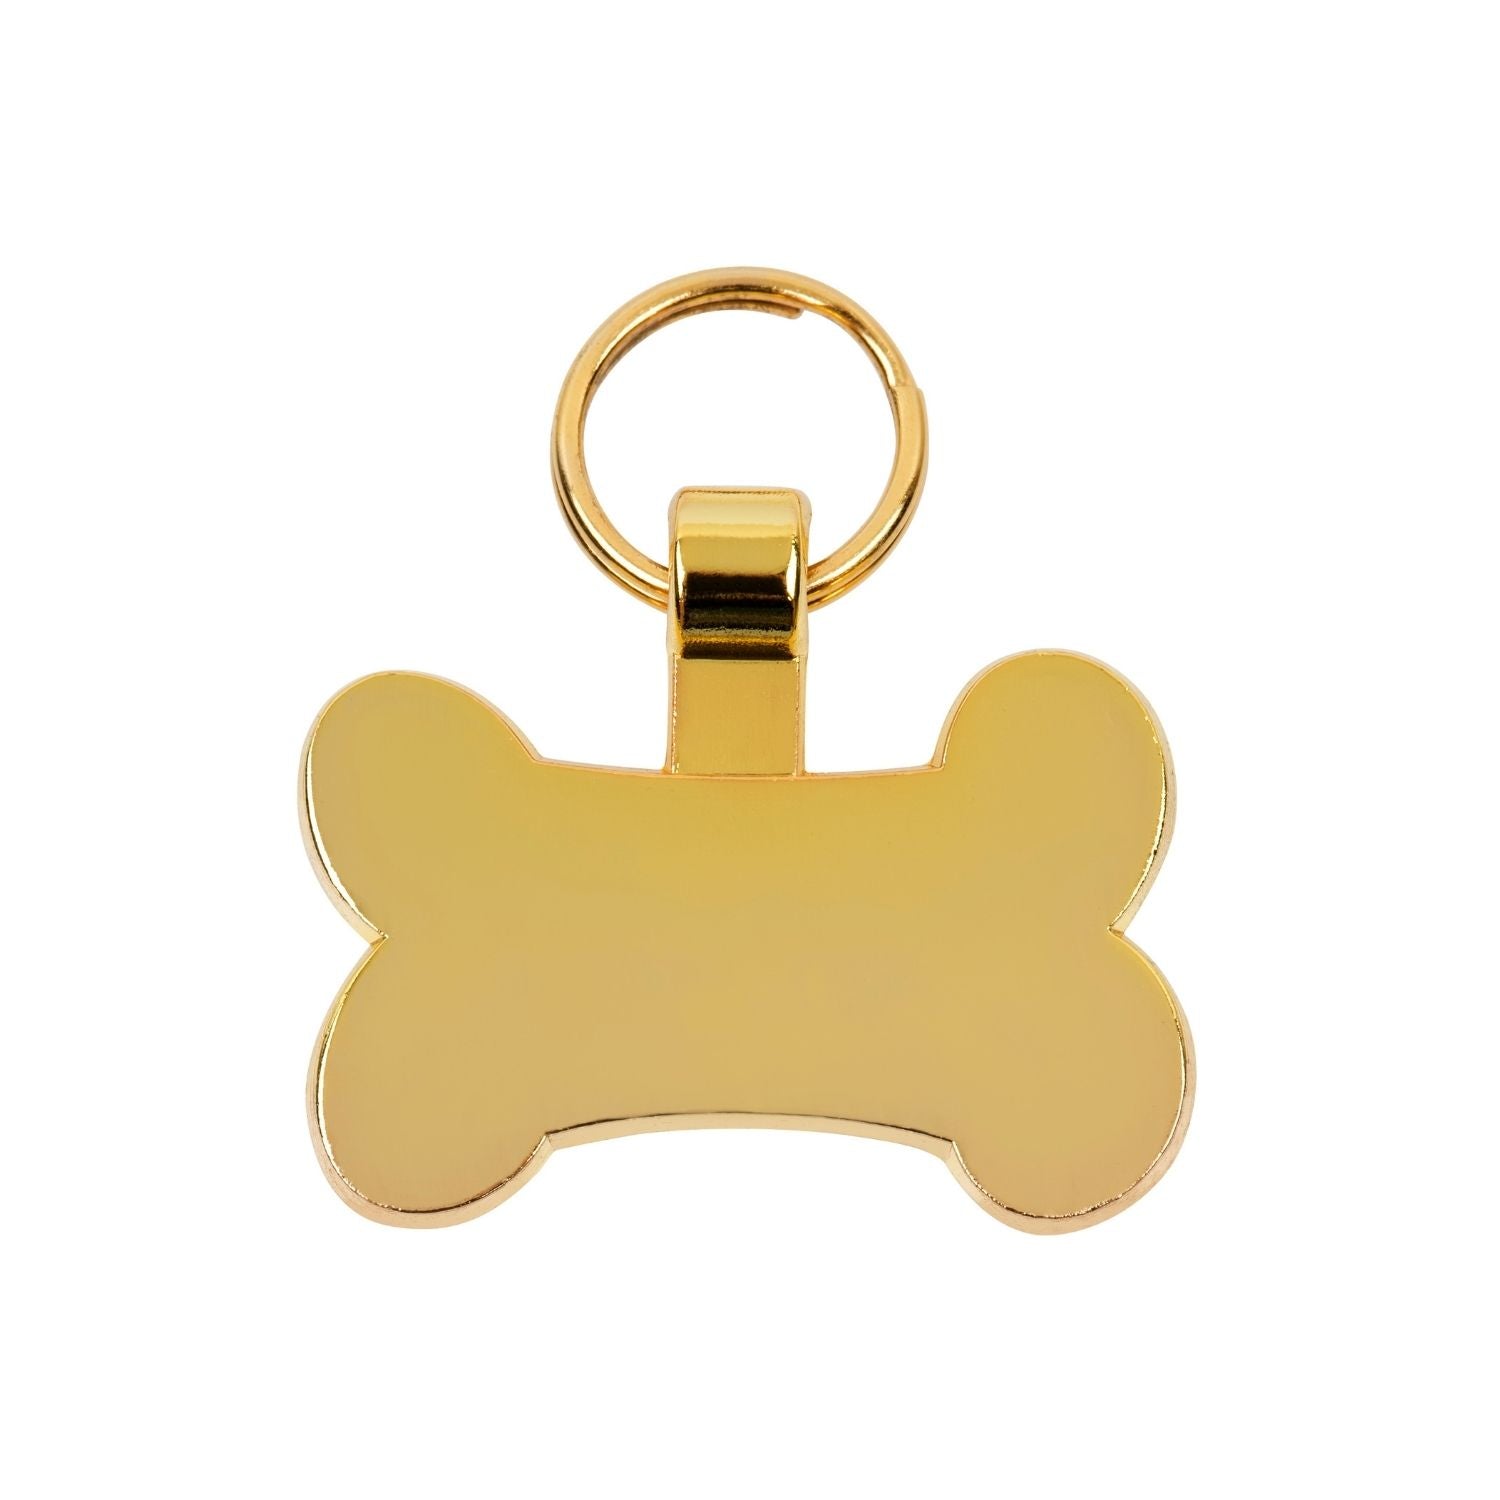 TagWorks Elegance Collection Bone Personalized Gold Pet ID Tag | PetSmart